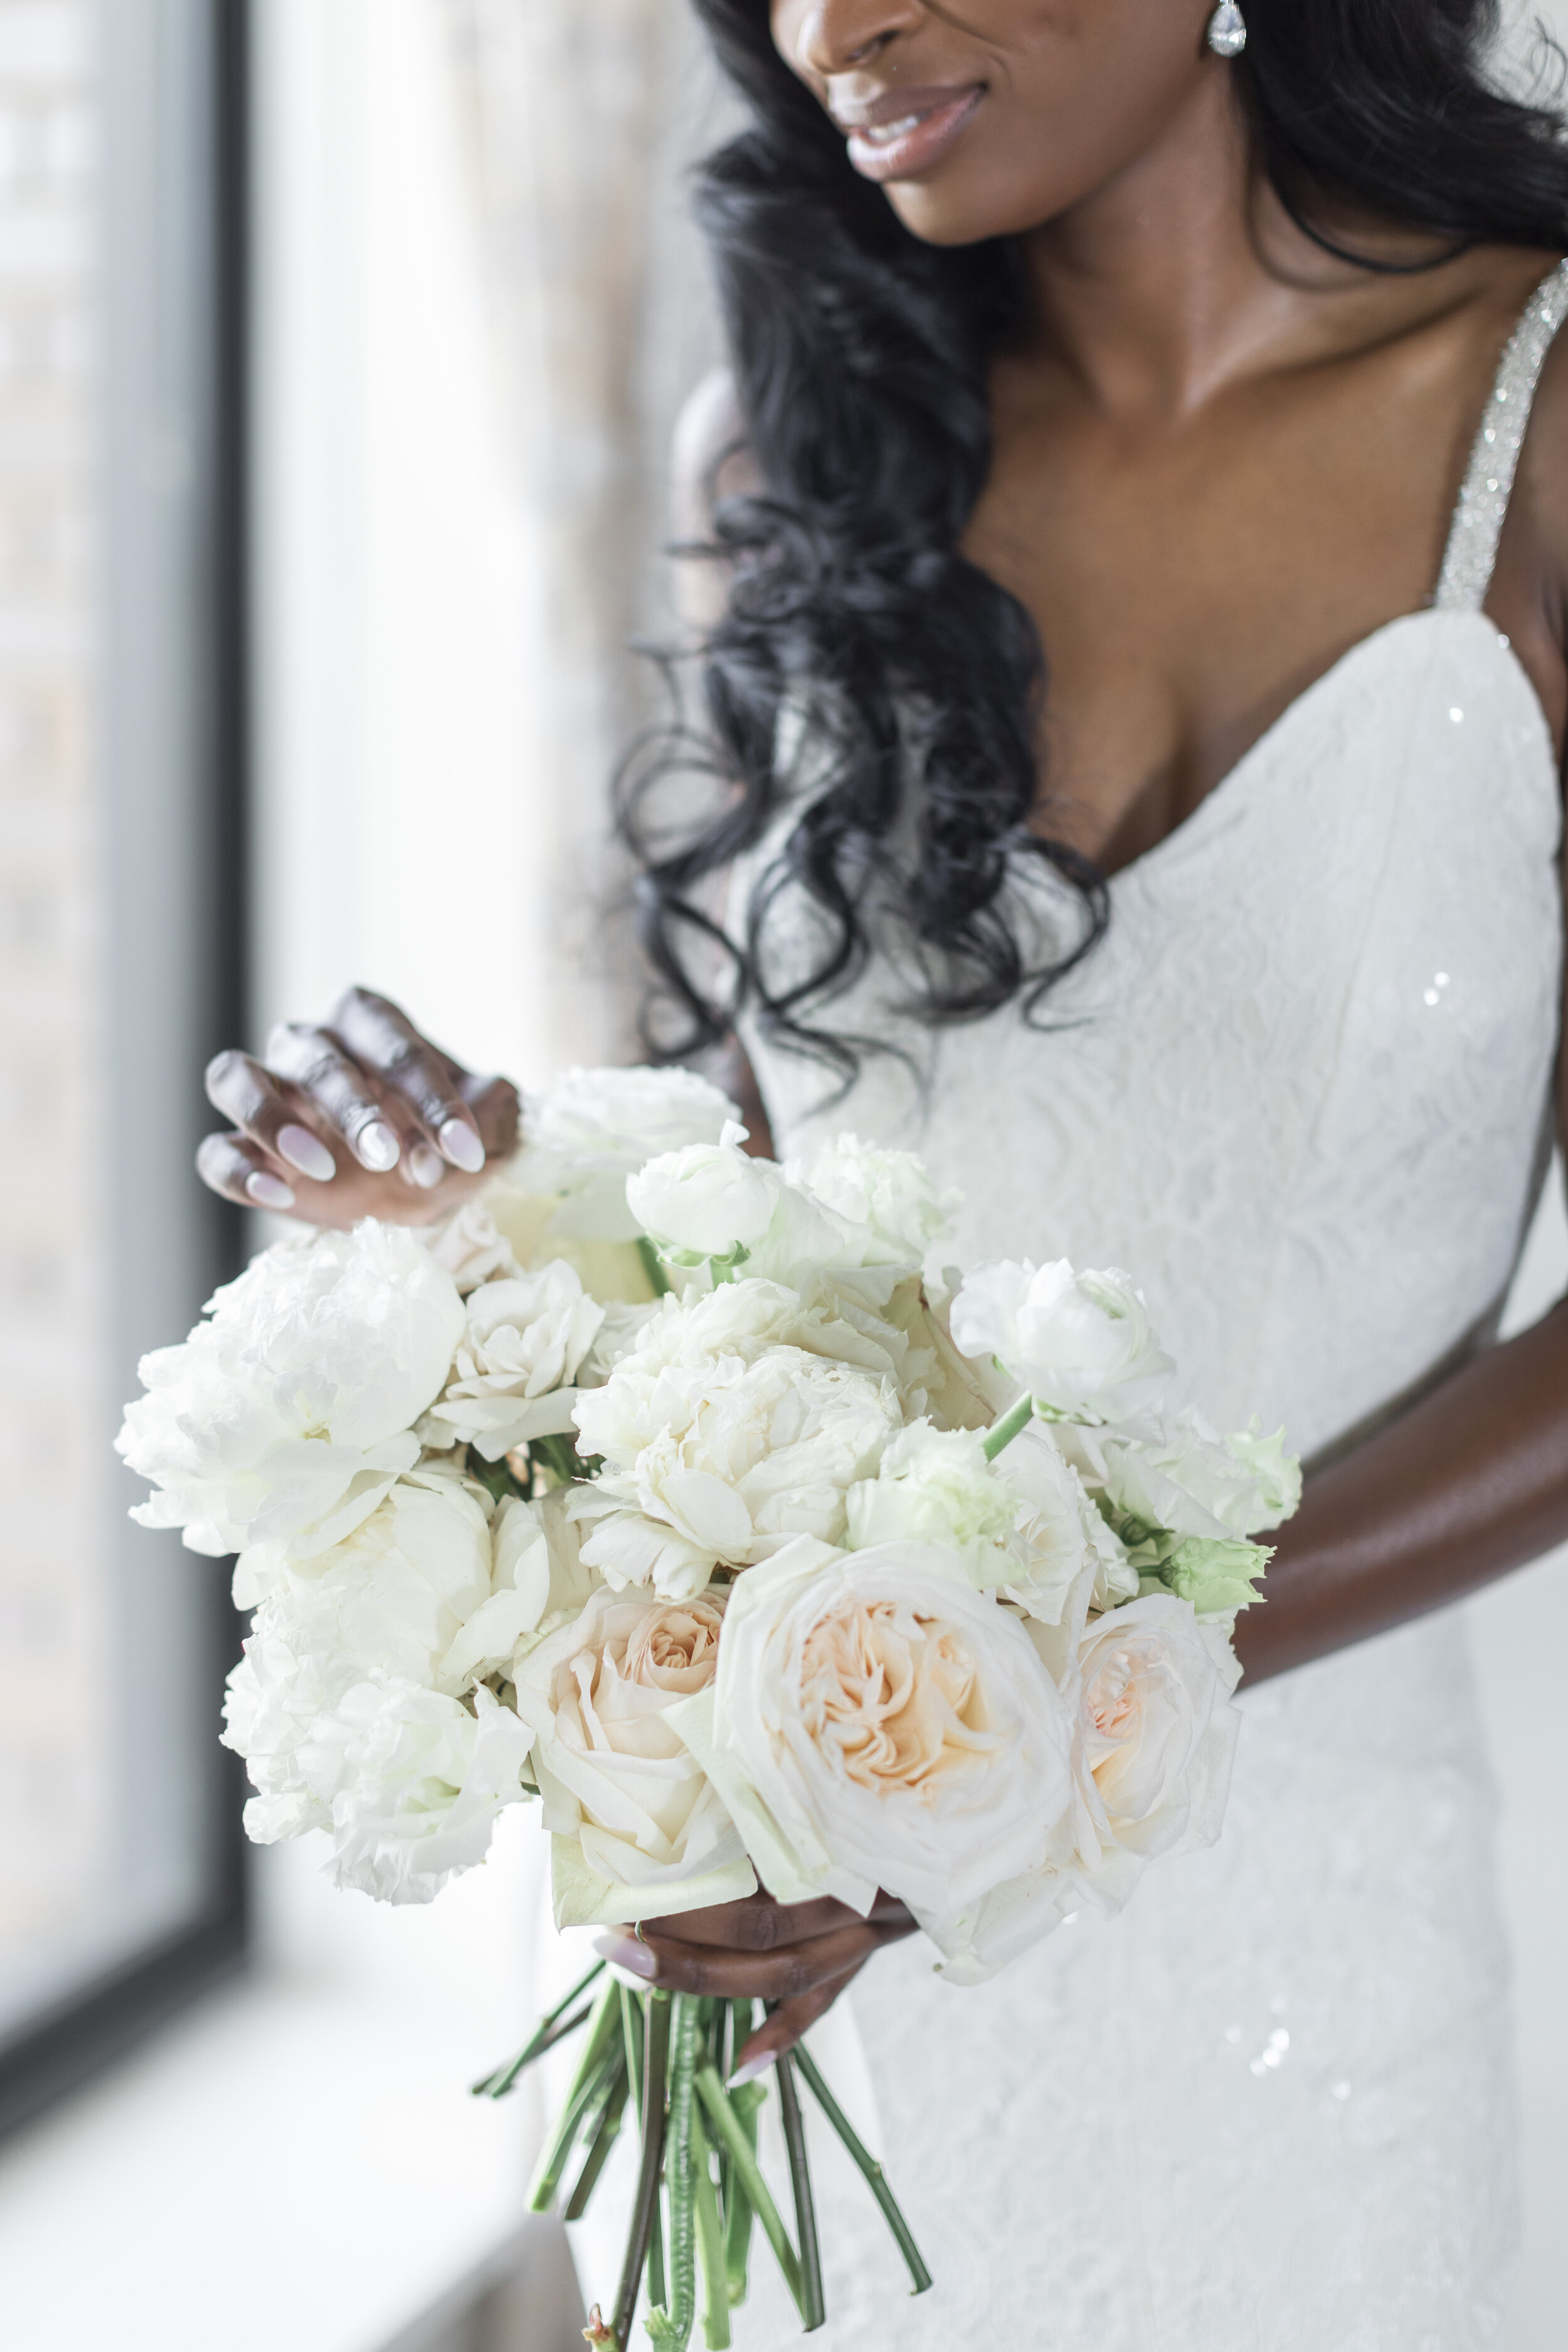  A lovely bride posing with her bouquet containing white flowers with touches of blush. Wedding bouquet inspiration white wedding bouquet savanna richardson photography elegant wedding ideas fort worth texas wedding photographer blush wedding flowers